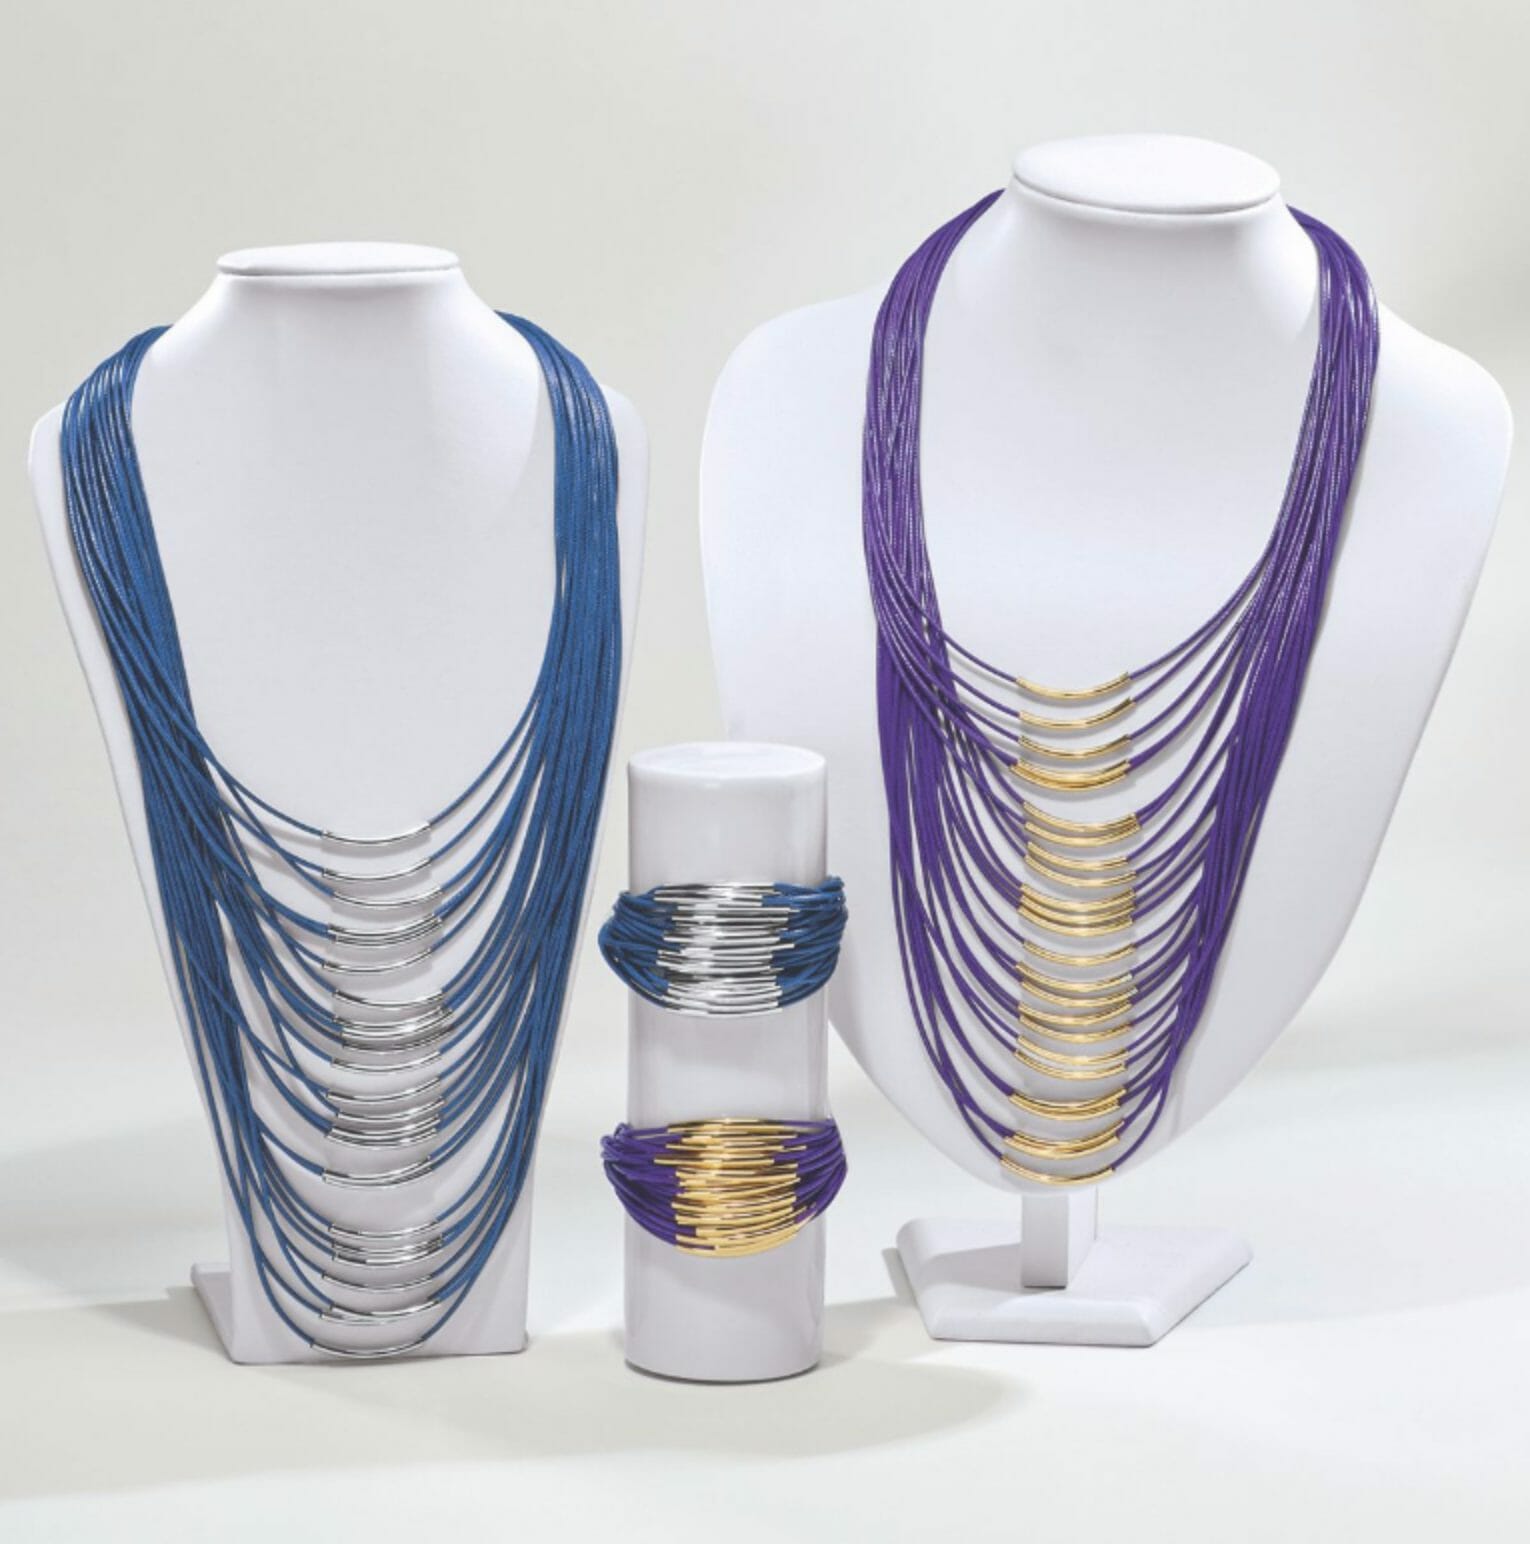 Two multi-strand necklaces and matching bracelets, one in blue and silver, the other in purple and gold.